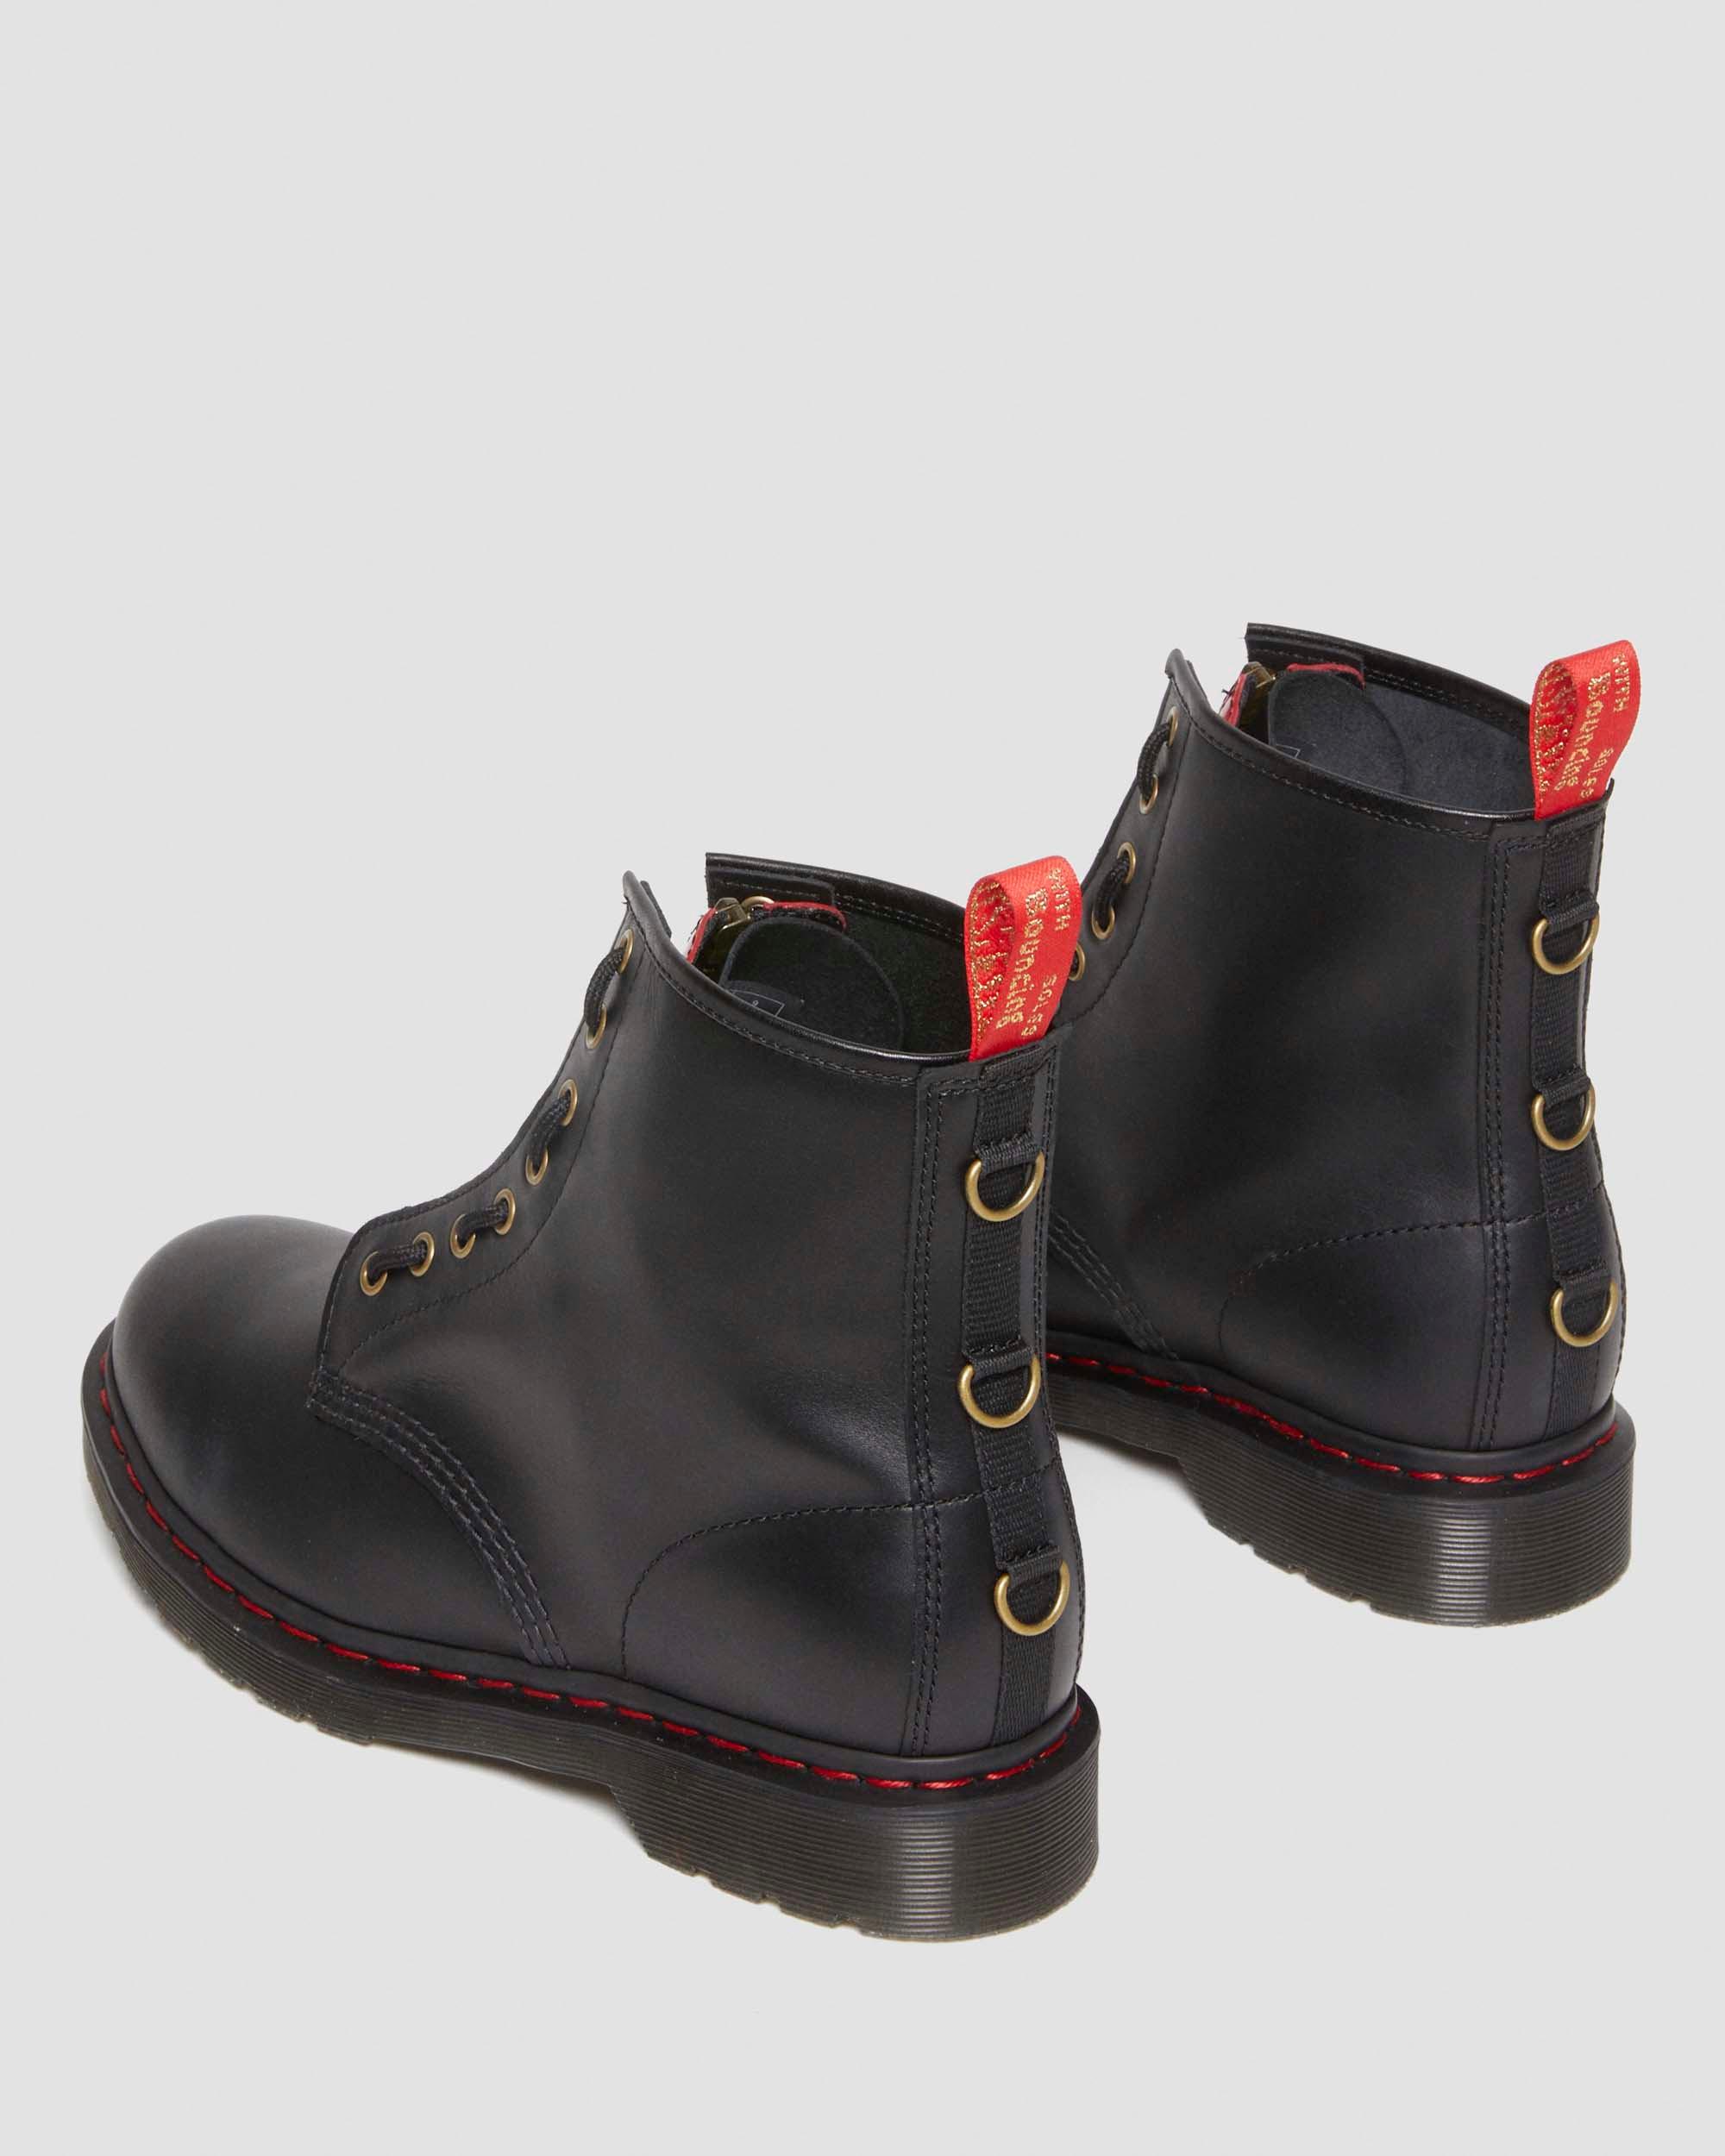 1460 Year of the Rabbit Smooth Leather Lace Up Boots1460 Year of the Rabbit Leather Lace Up Boots Dr. Martens